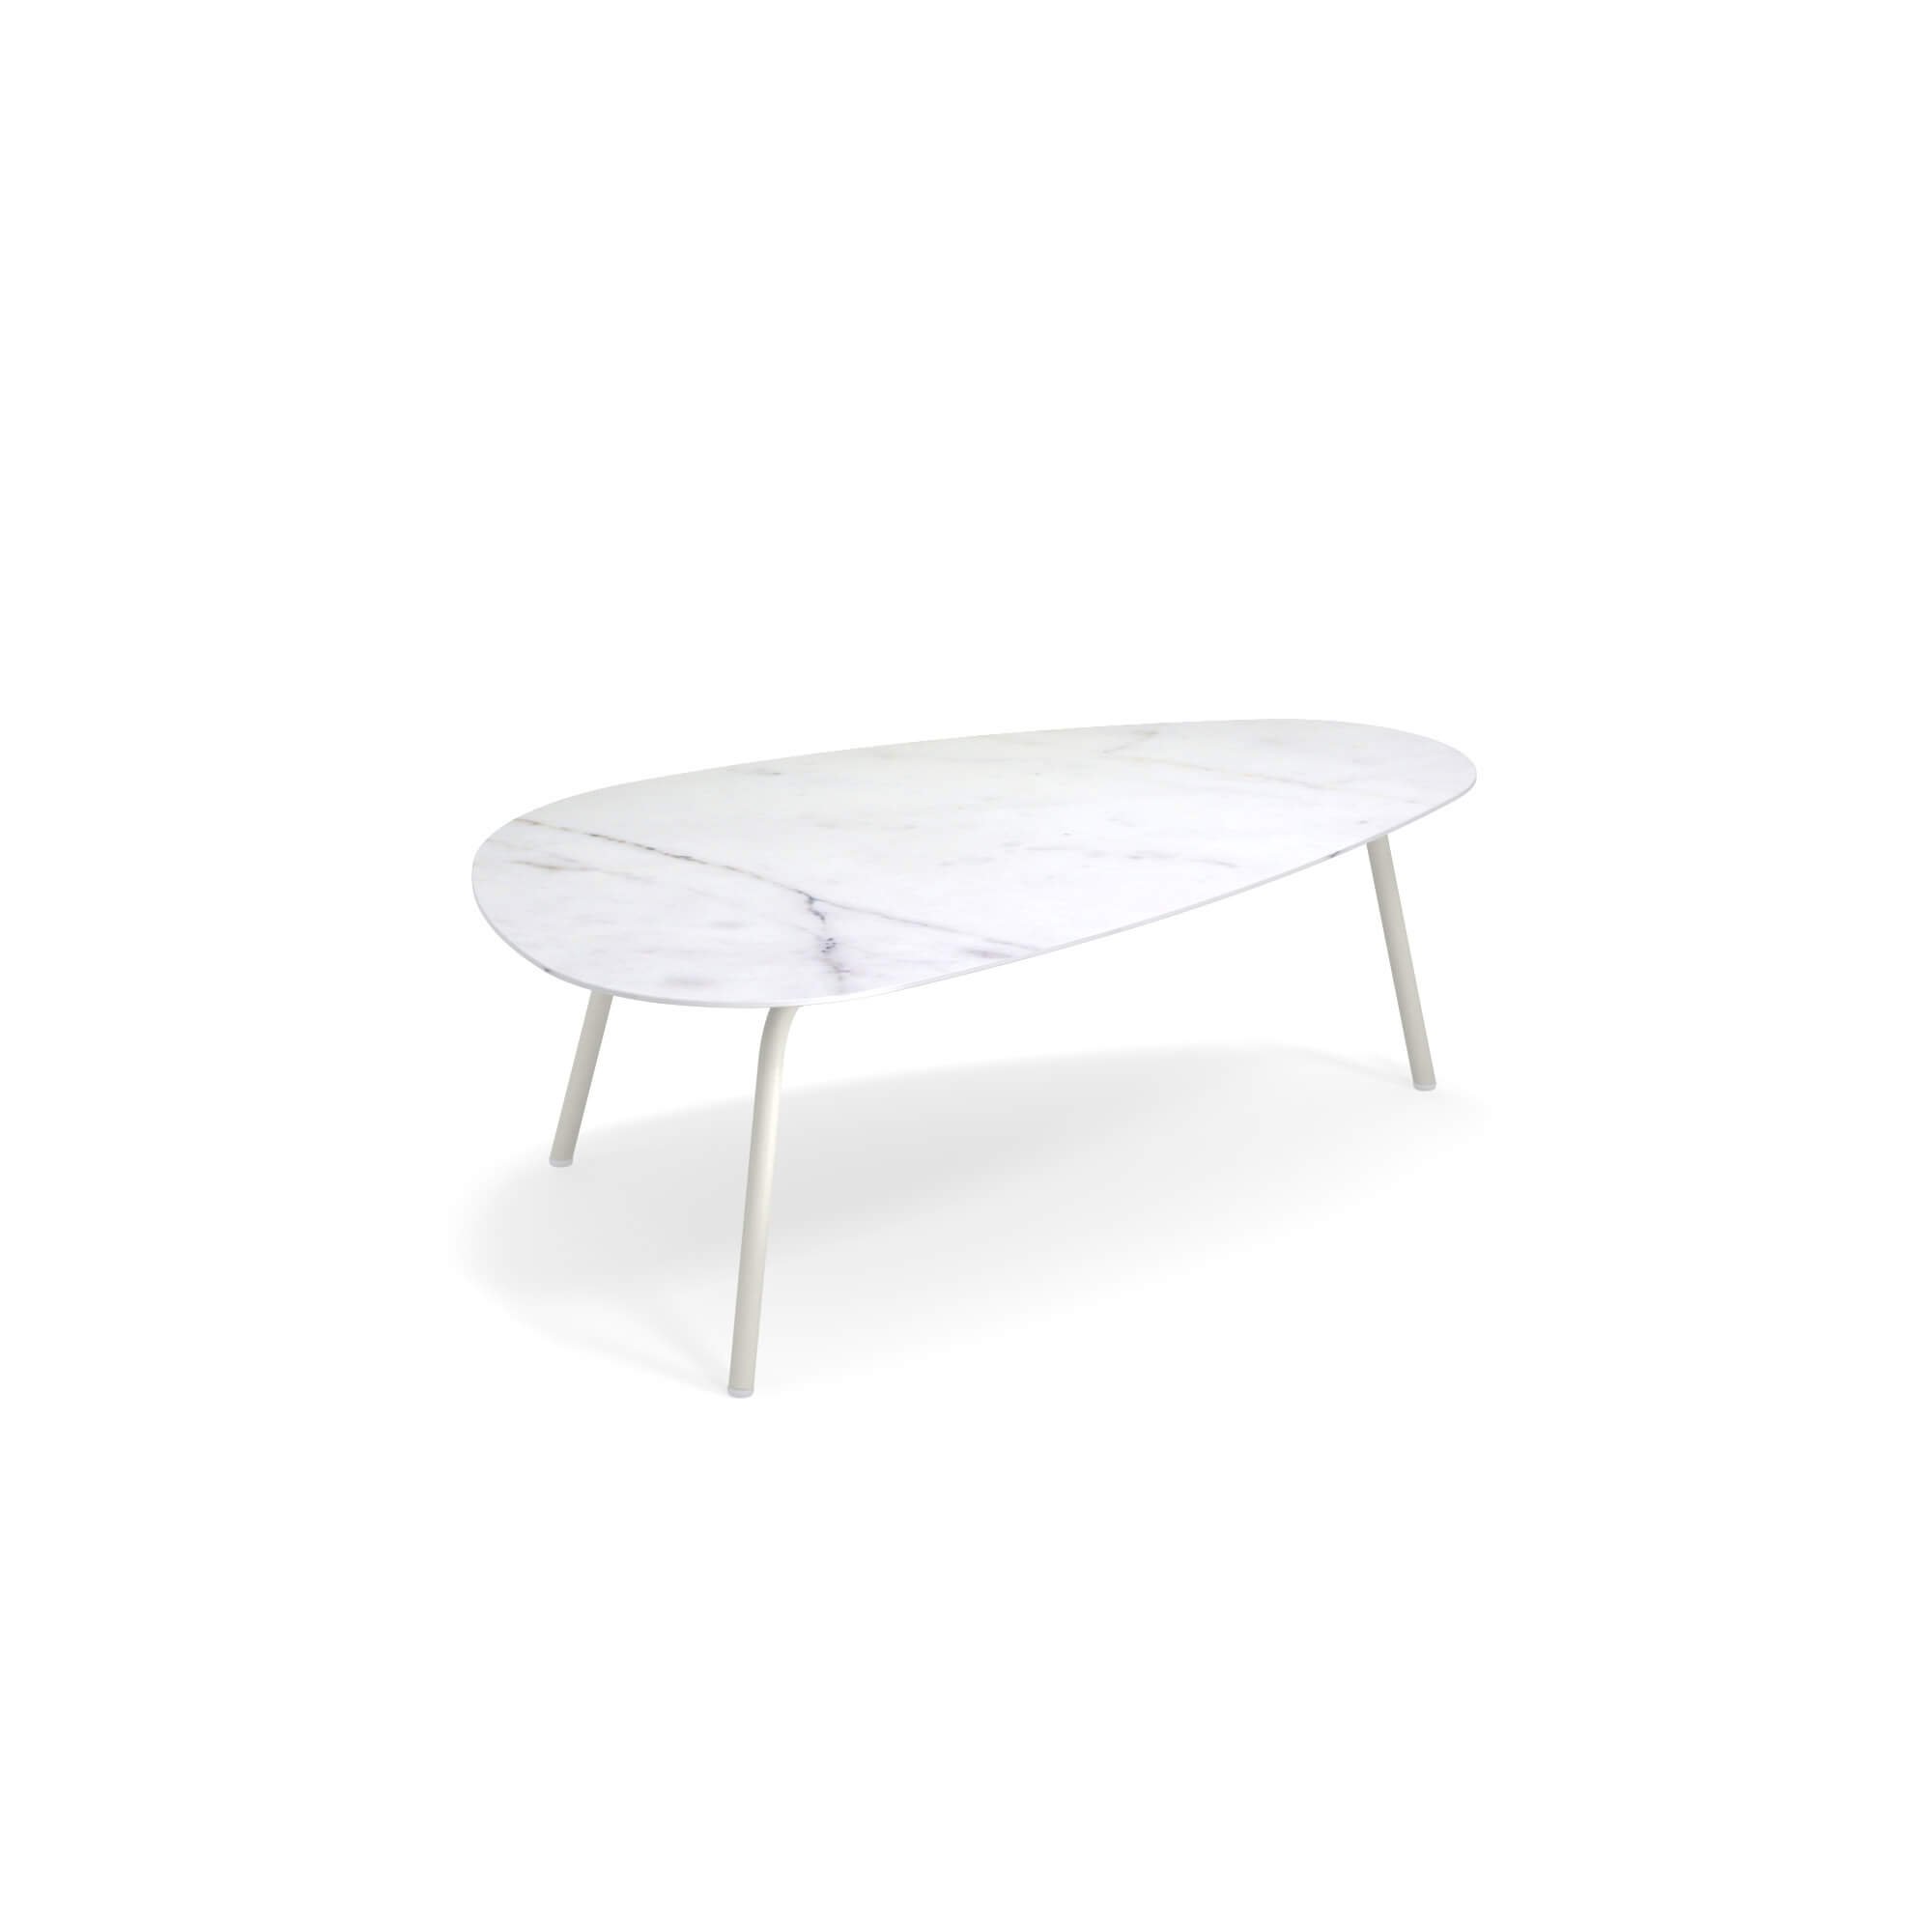 Terramare Coffee Table from Emu, designed by Chiaramonte and Marin